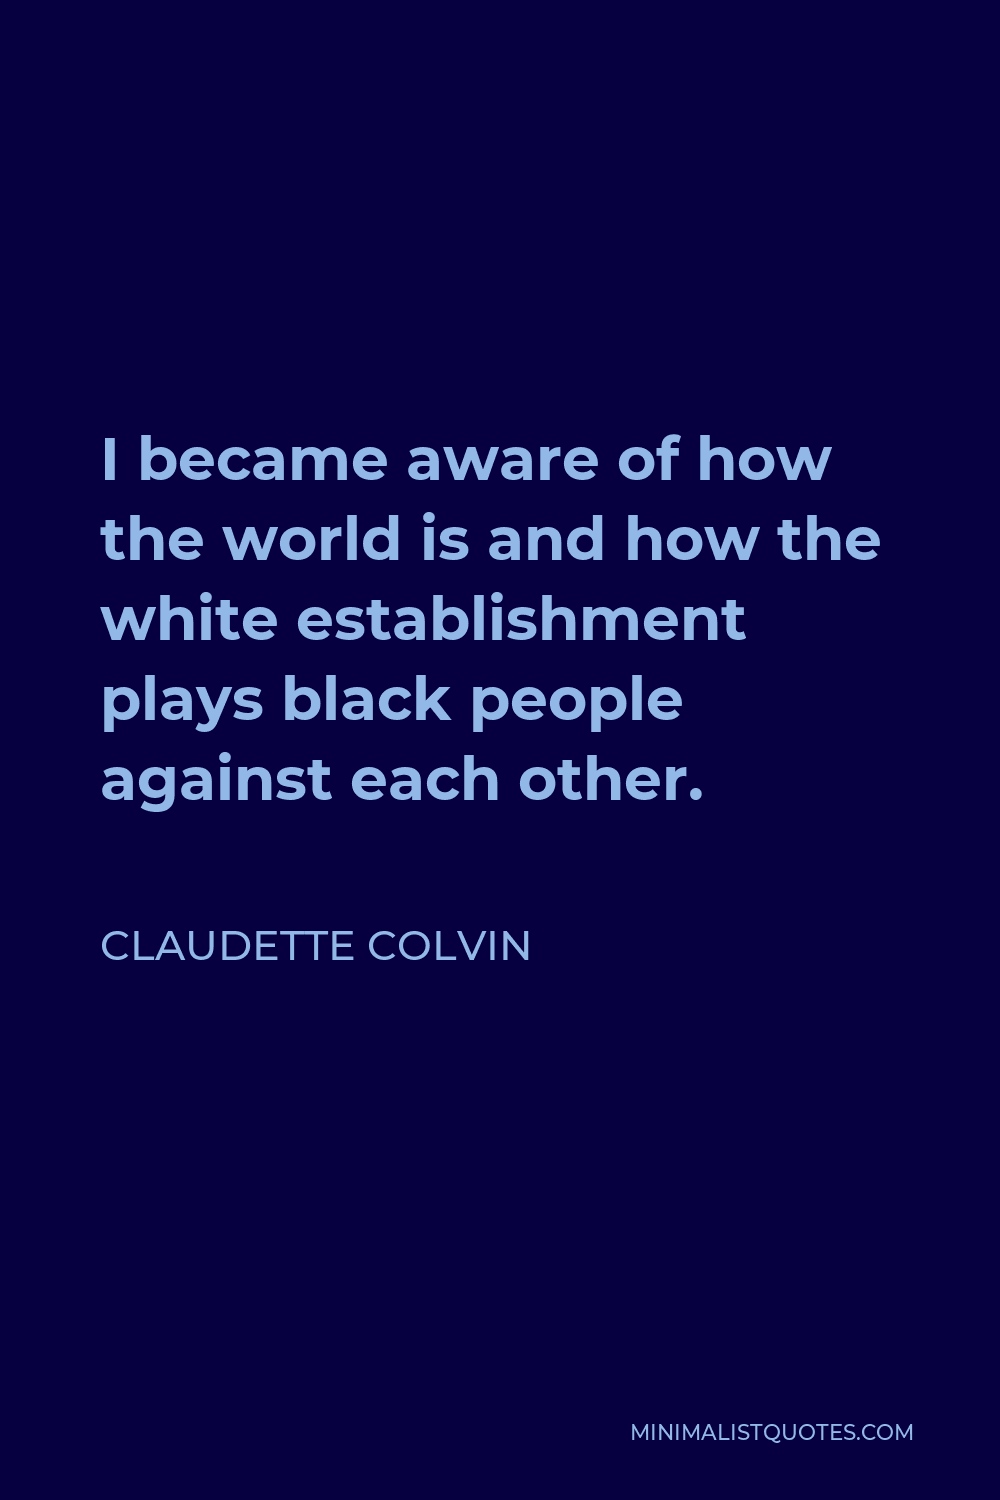 Claudette Colvin Quote - I became aware of how the world is and how the white establishment plays black people against each other.